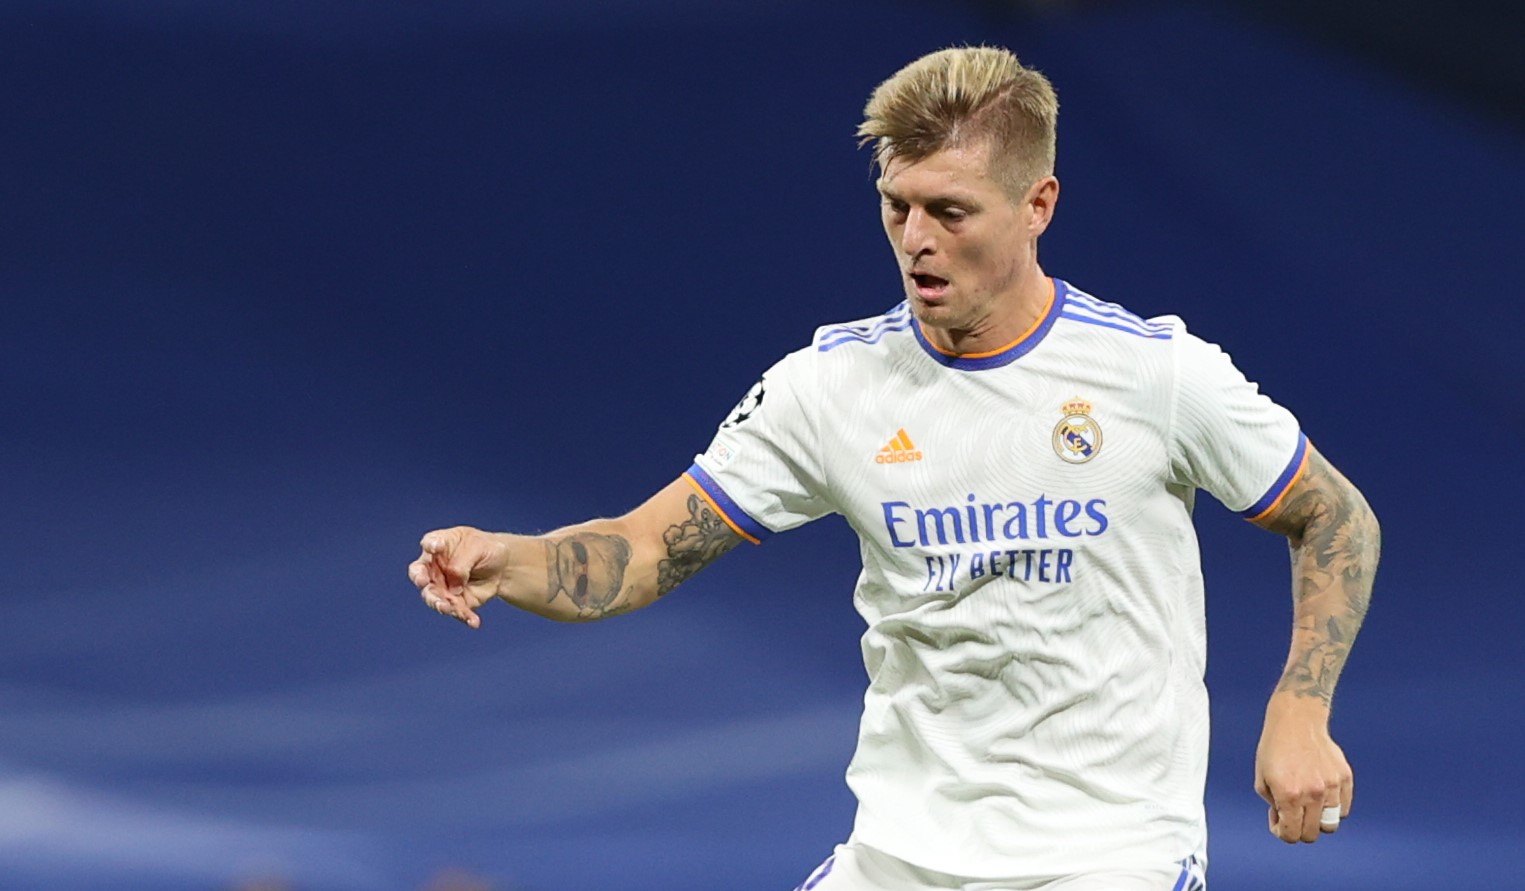 Toni Kroos’ agent issues update on Real Madrid star’s future amid transfer links